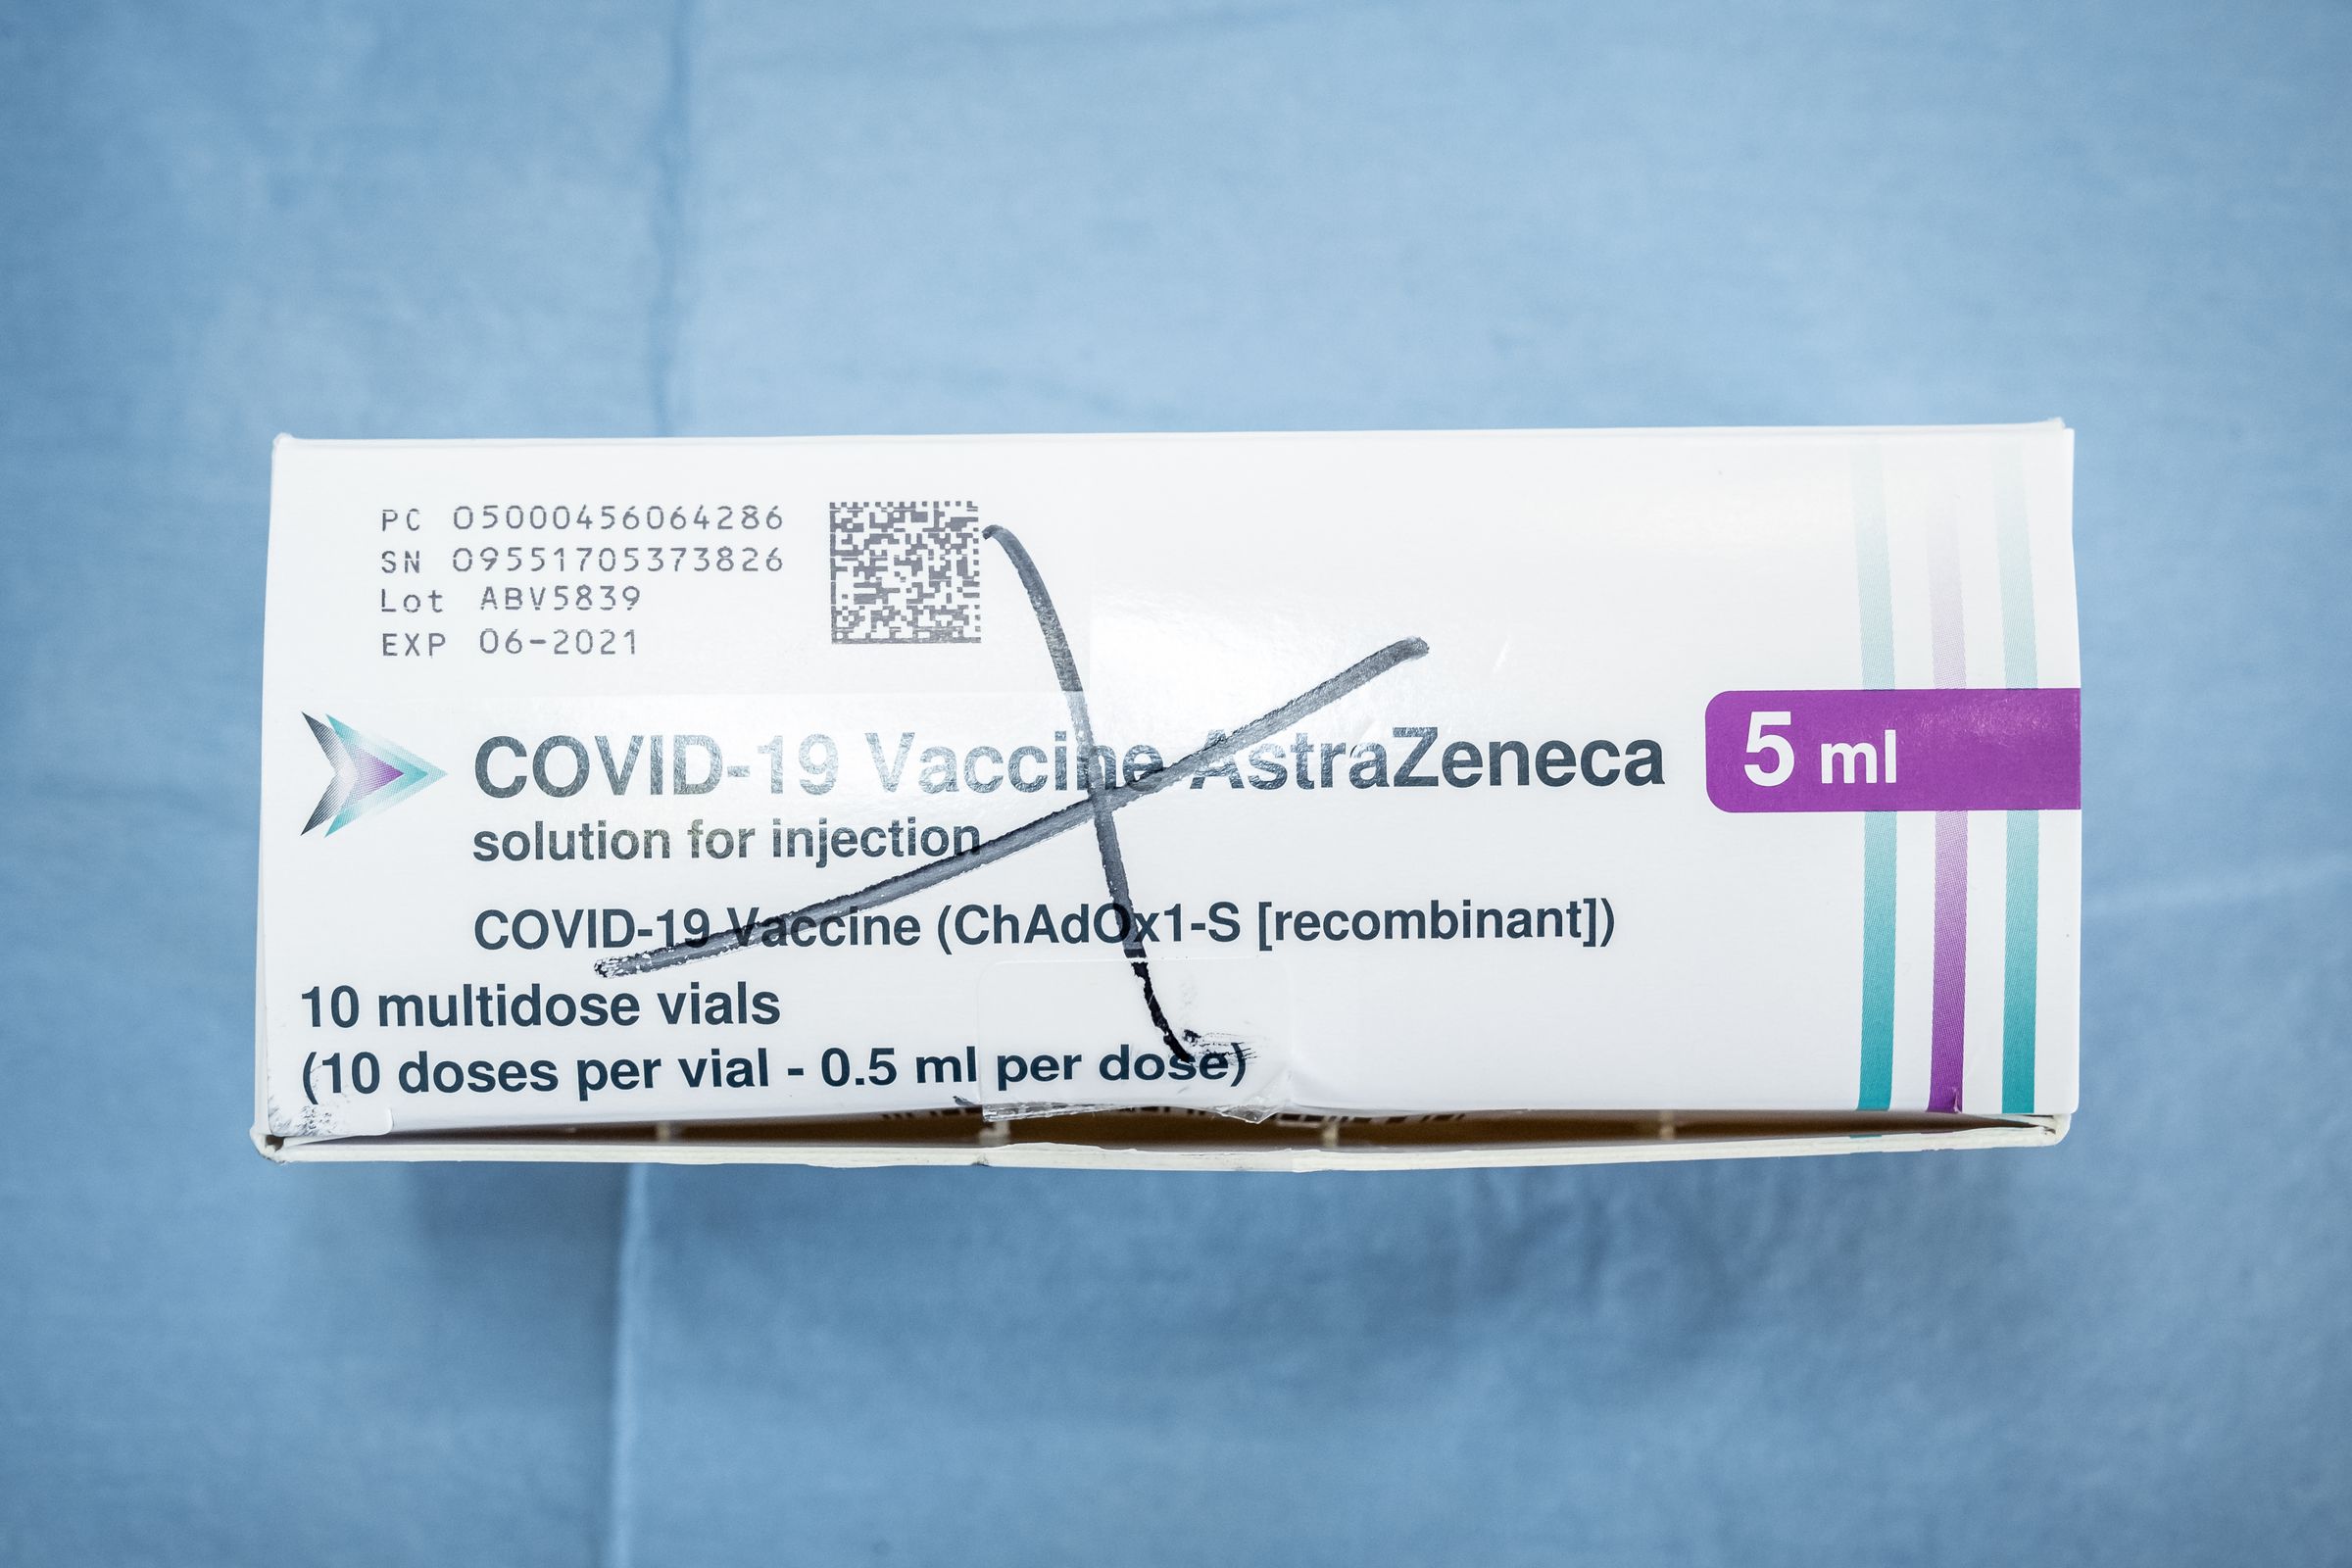 Covid-19 Vaccination in Italy’s Naples